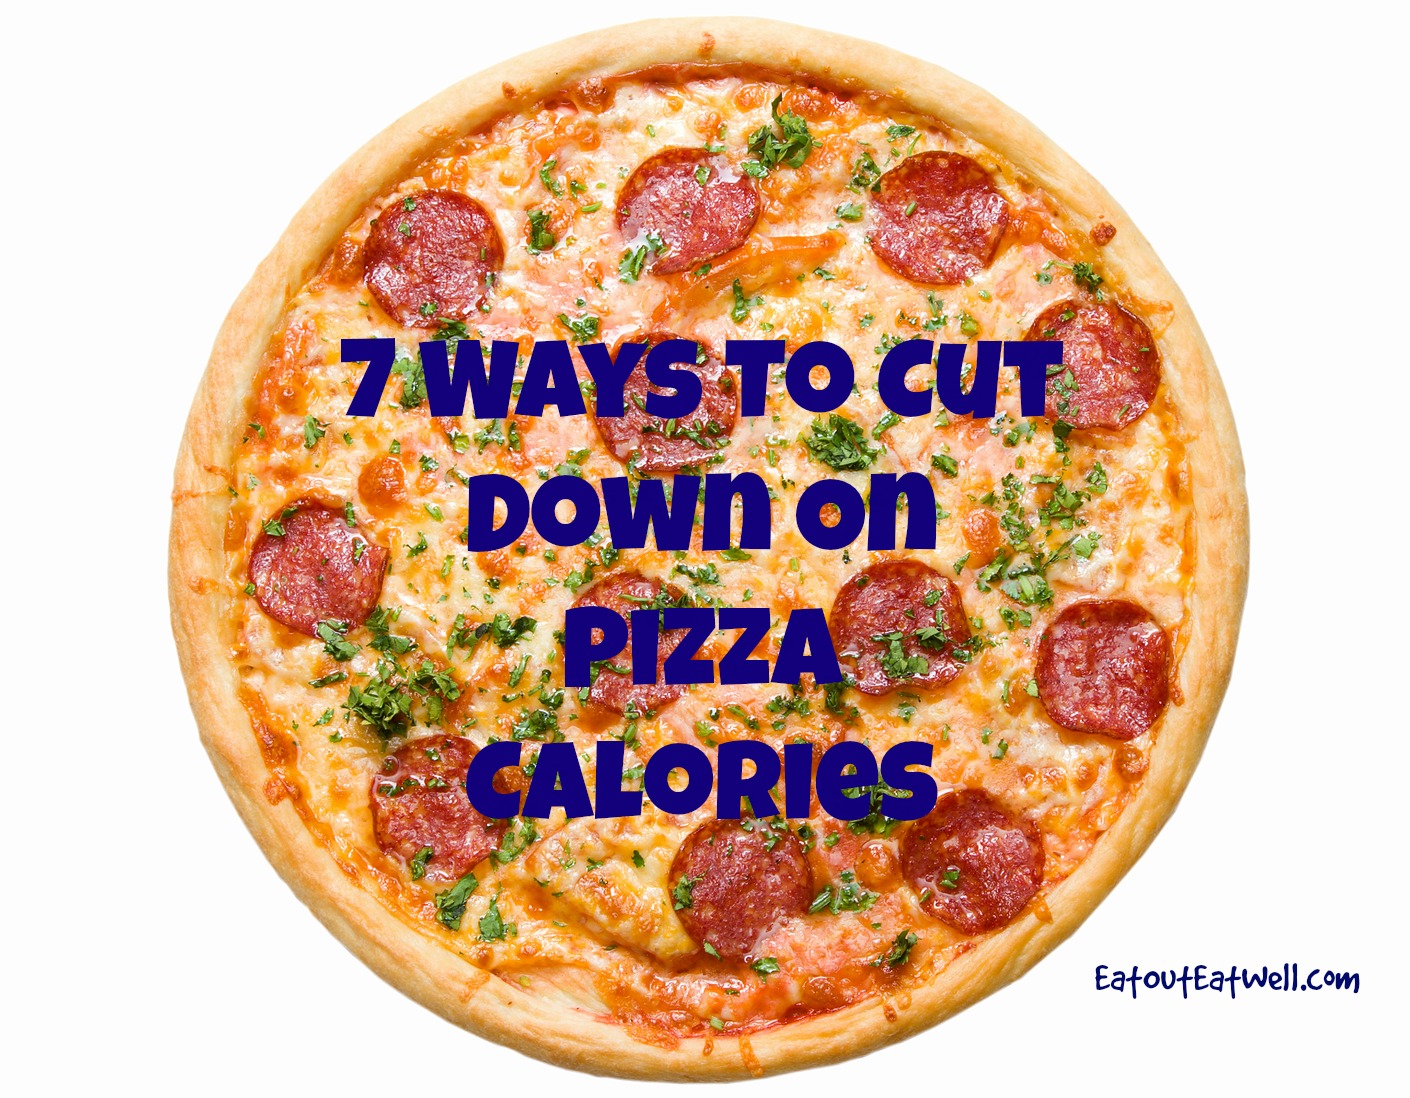 How many calories are in a slice of Sam's Club pizza? - Foodly